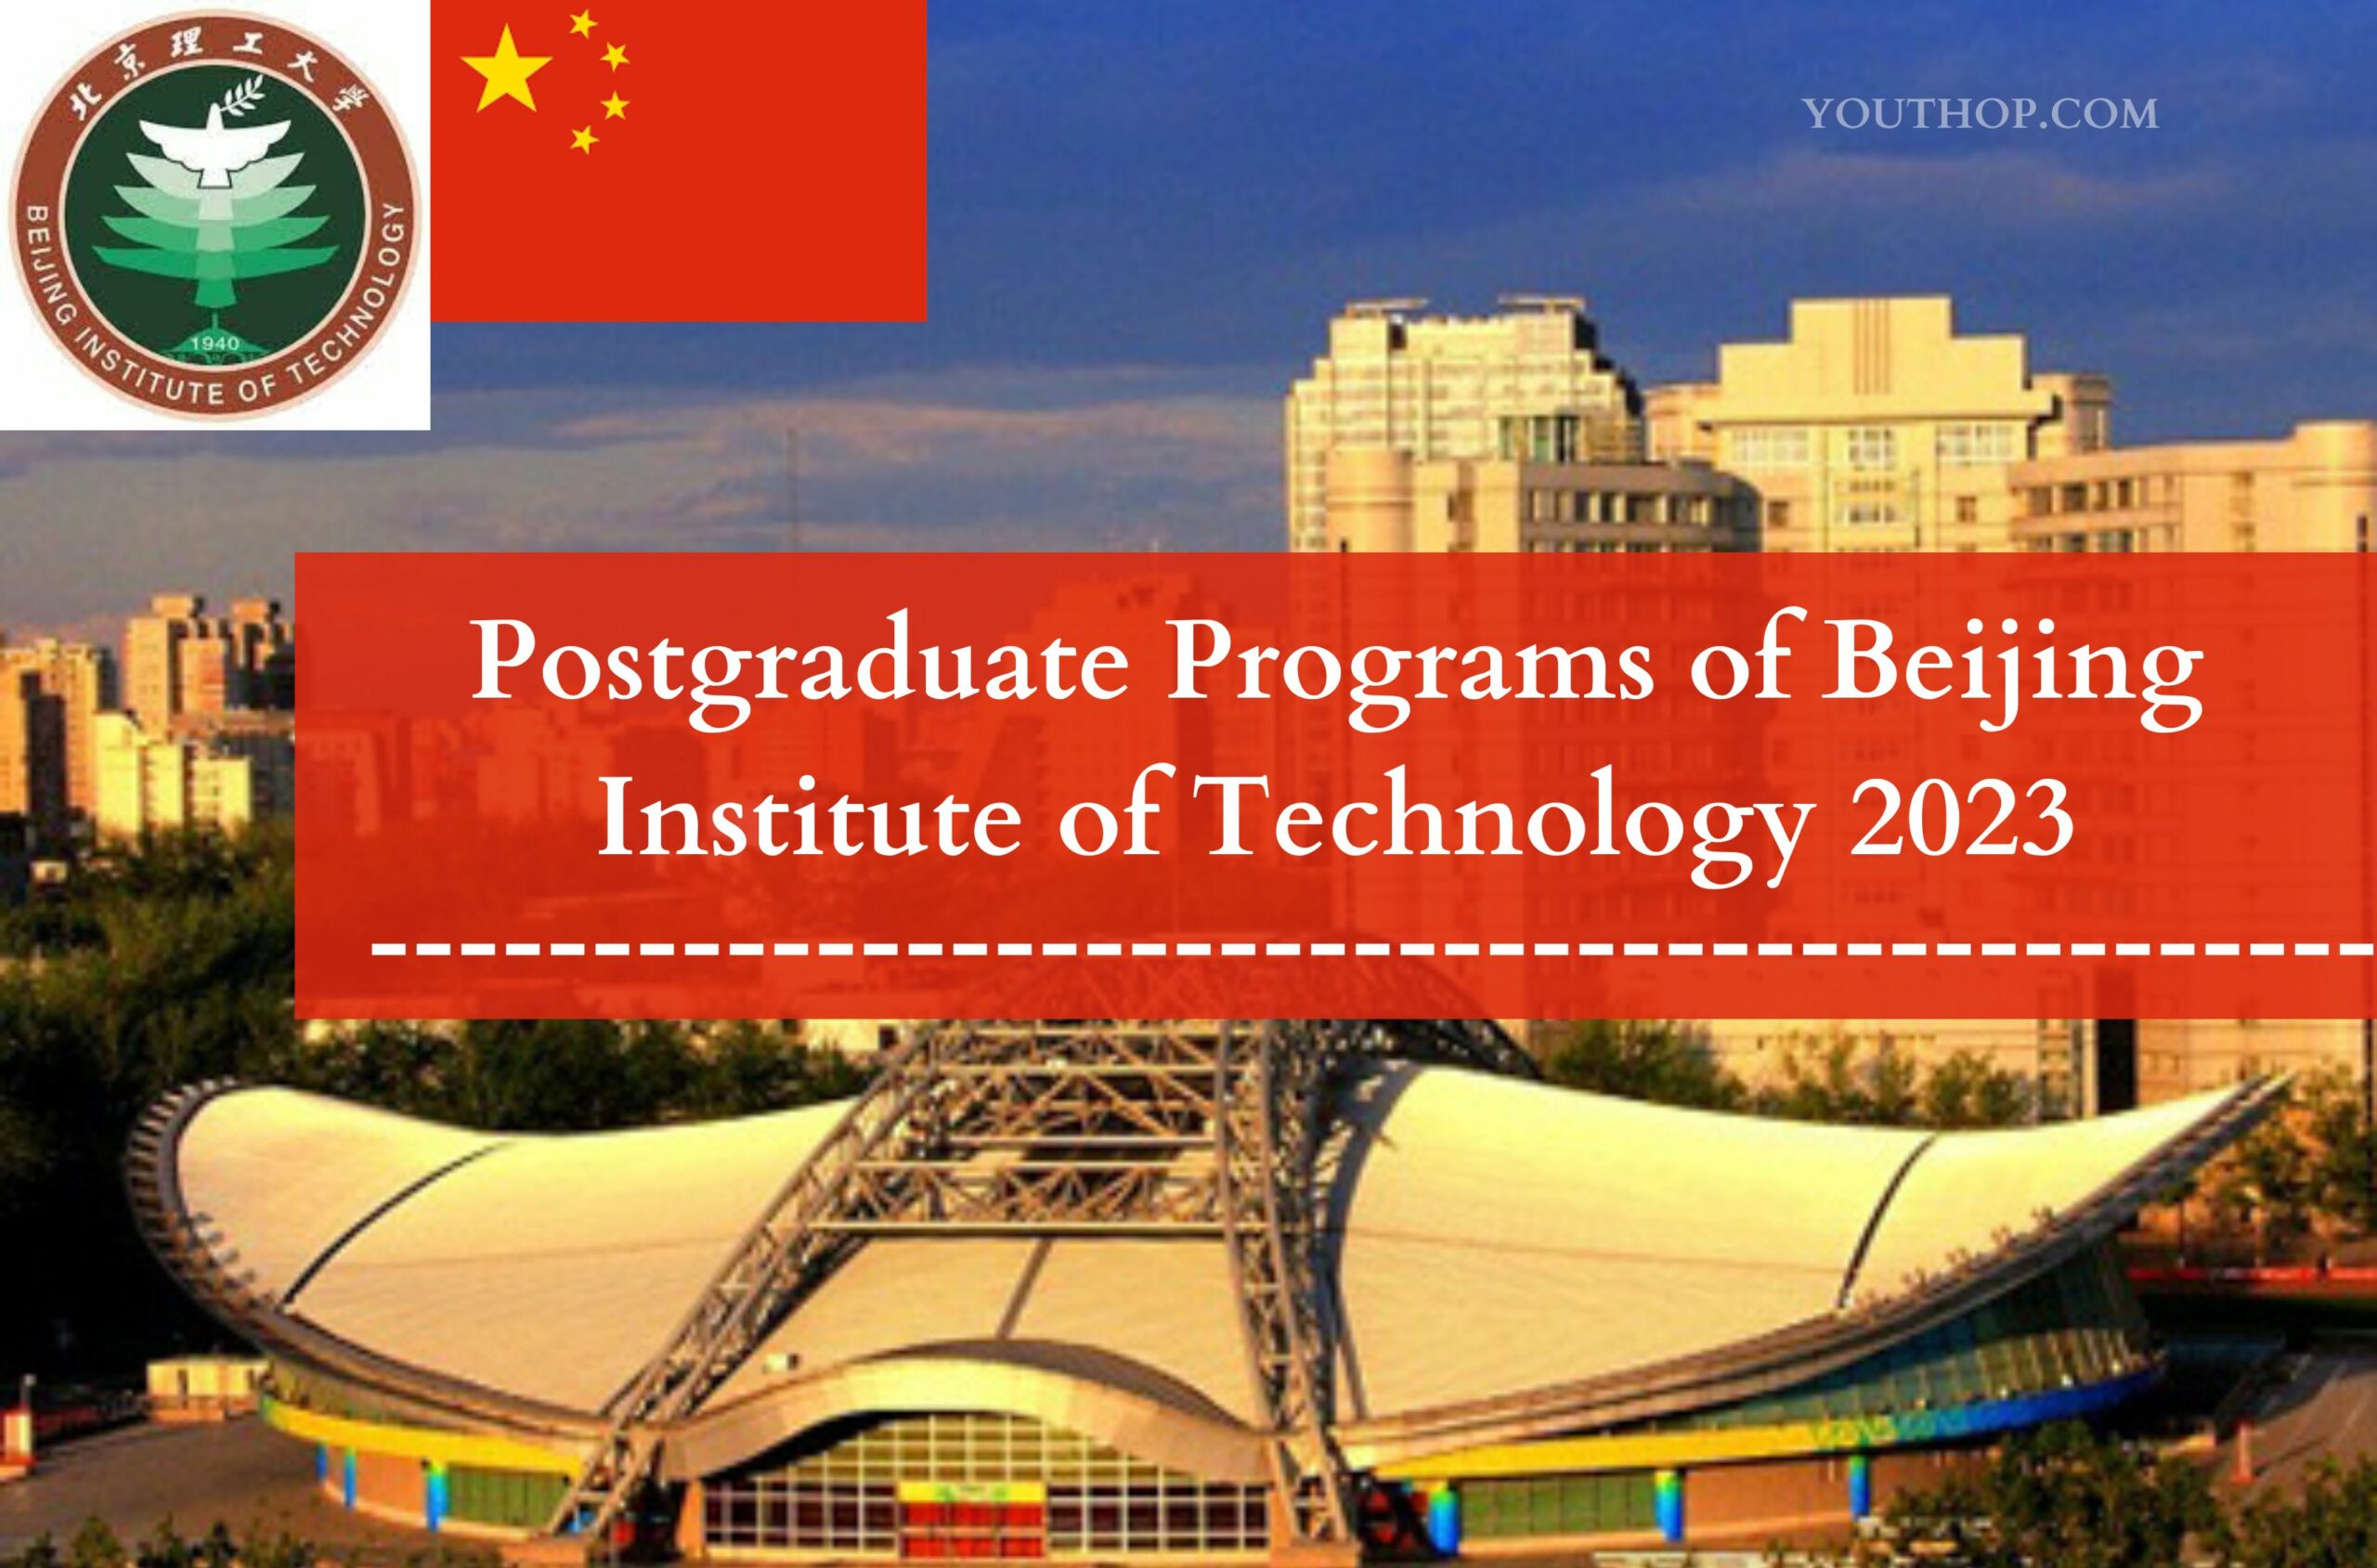 Postgraduate Programs of Beijing Institute of Technology 2023 Youth